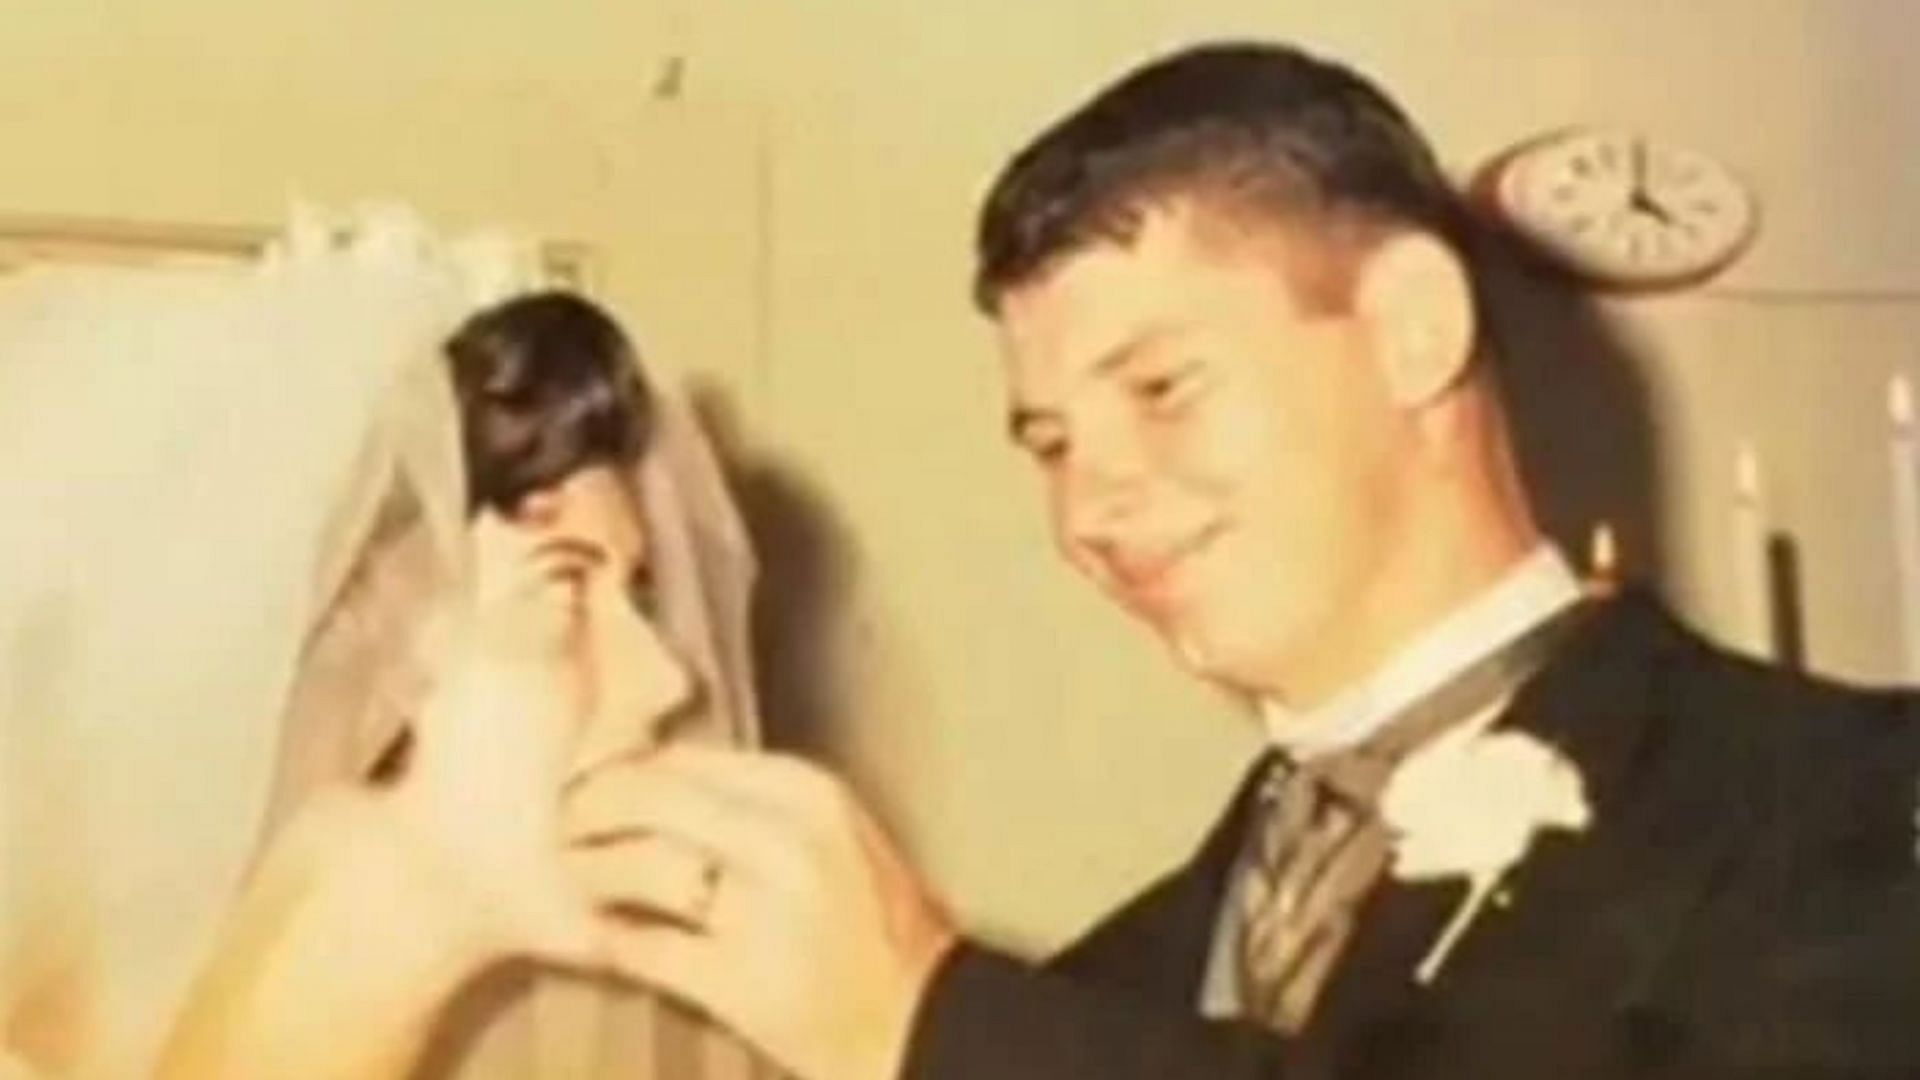 Former WWE CEOs Linda and Vince McMahon married in 1966